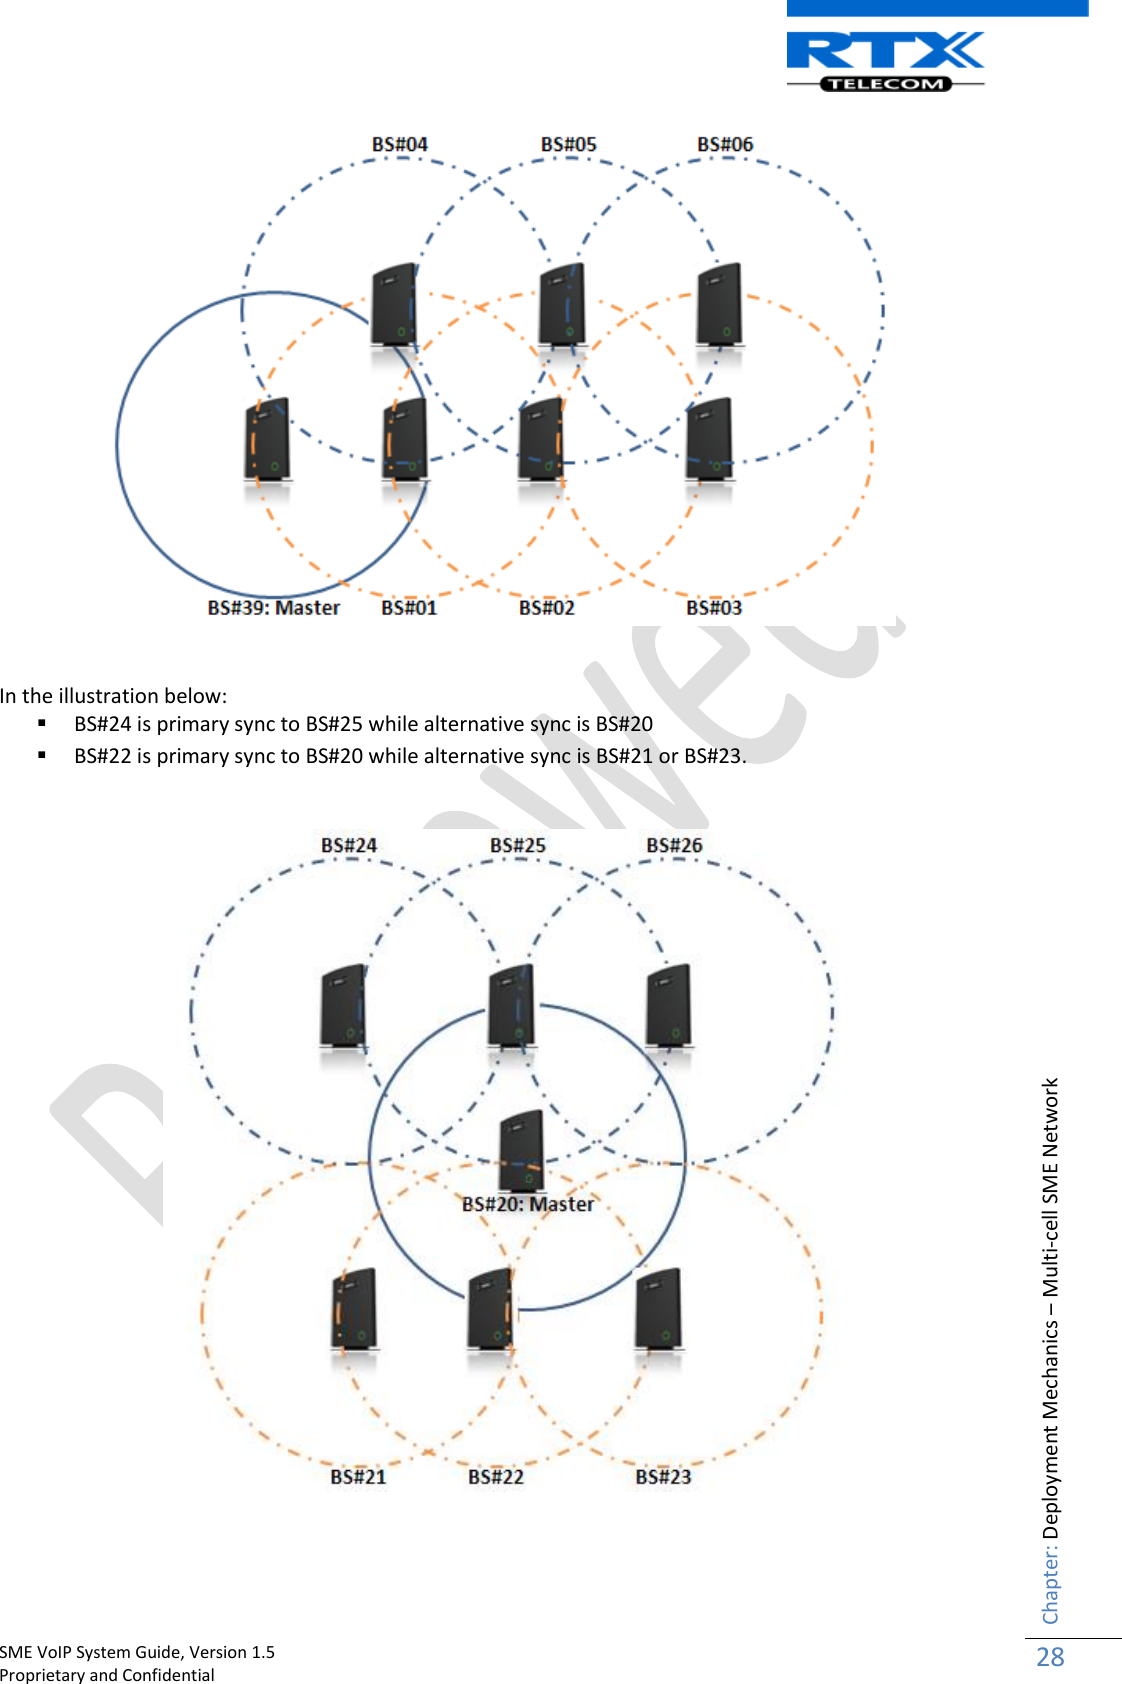    SME VoIP System Guide, Version 1.5                                                                                                                                                          Proprietary and Confidential    Chapter: Deployment Mechanics – Multi-cell SME Network 28     In the illustration below:   BS#24 is primary sync to BS#25 while alternative sync is BS#20  BS#22 is primary sync to BS#20 while alternative sync is BS#21 or BS#23.       